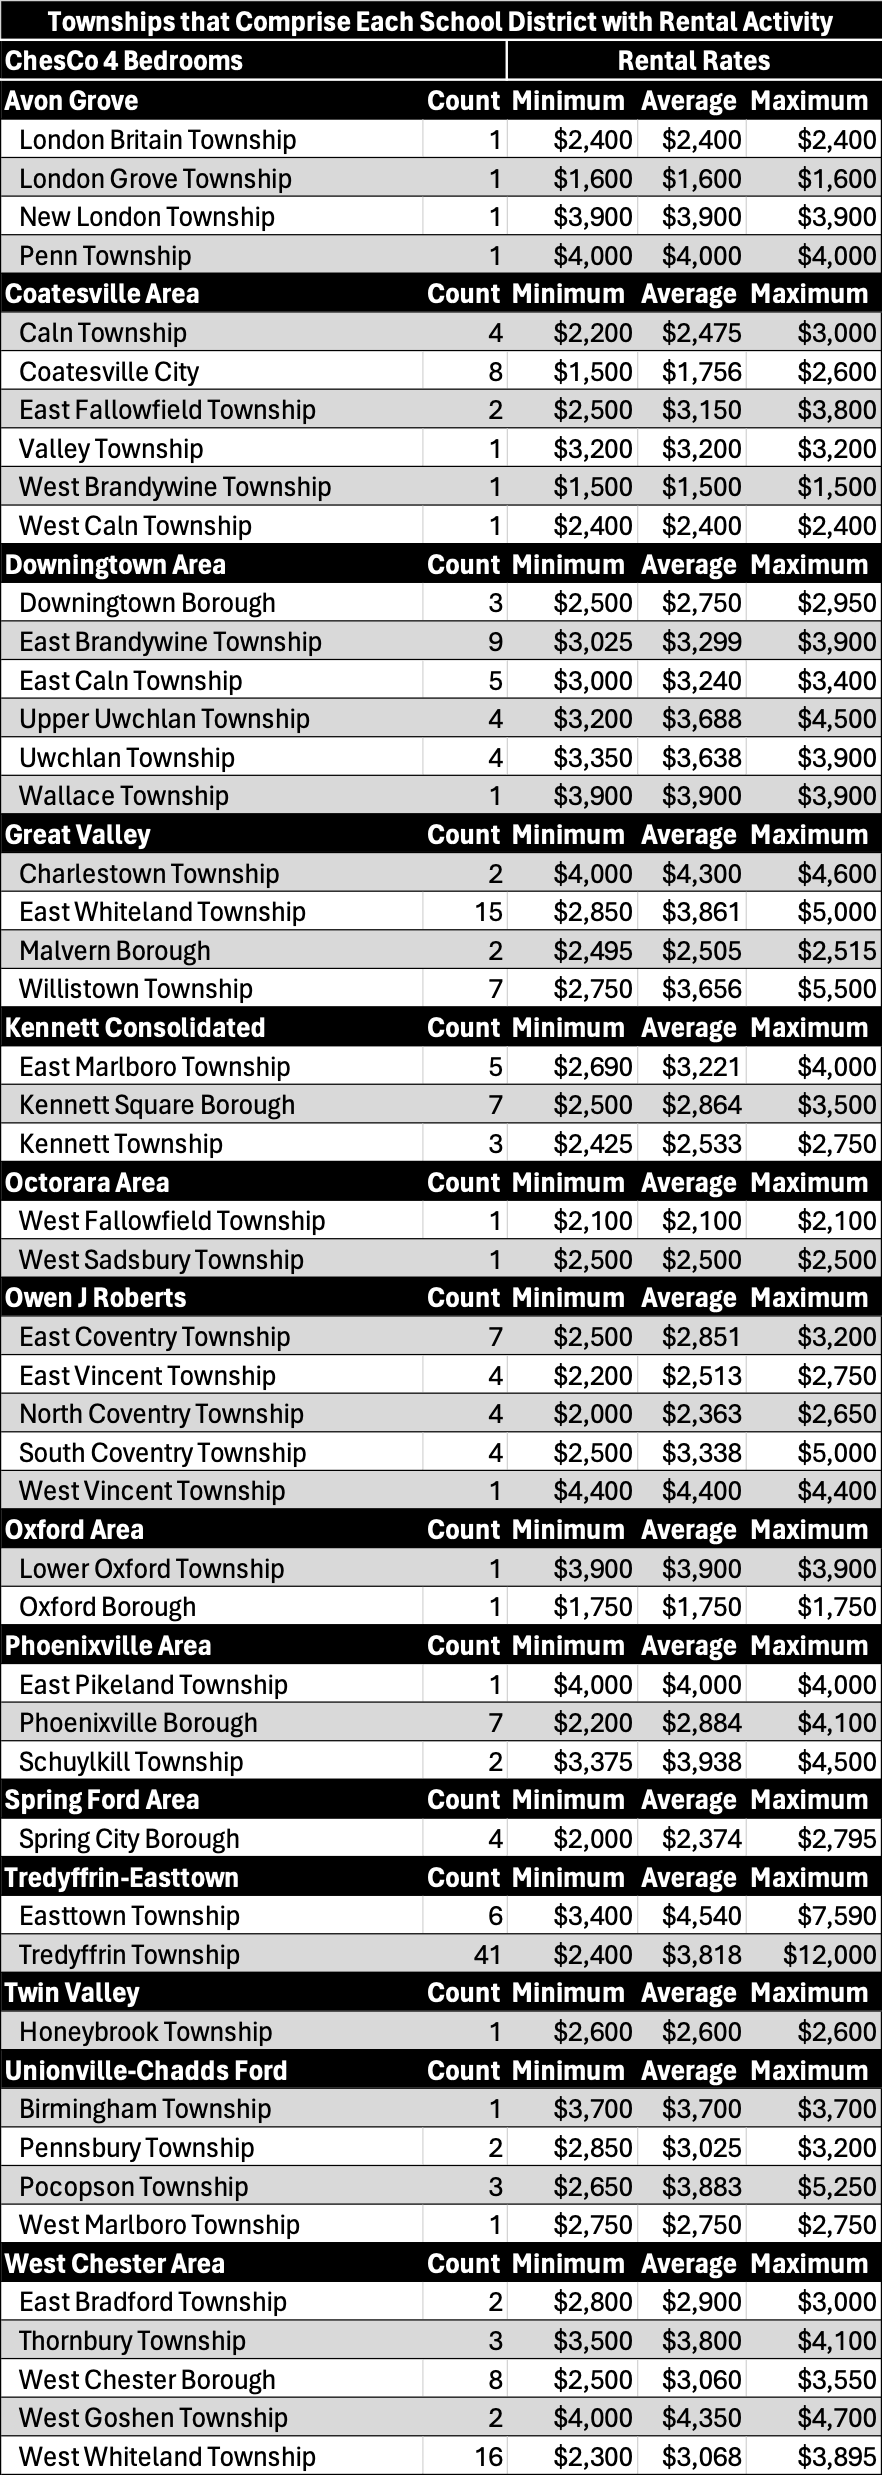 A table of each township within each School District in Chester County, PA for studios and 4 bedrooms, which includes the number of transactions and each township's corresponding rent prices displayed as minimum, average and maximum. 